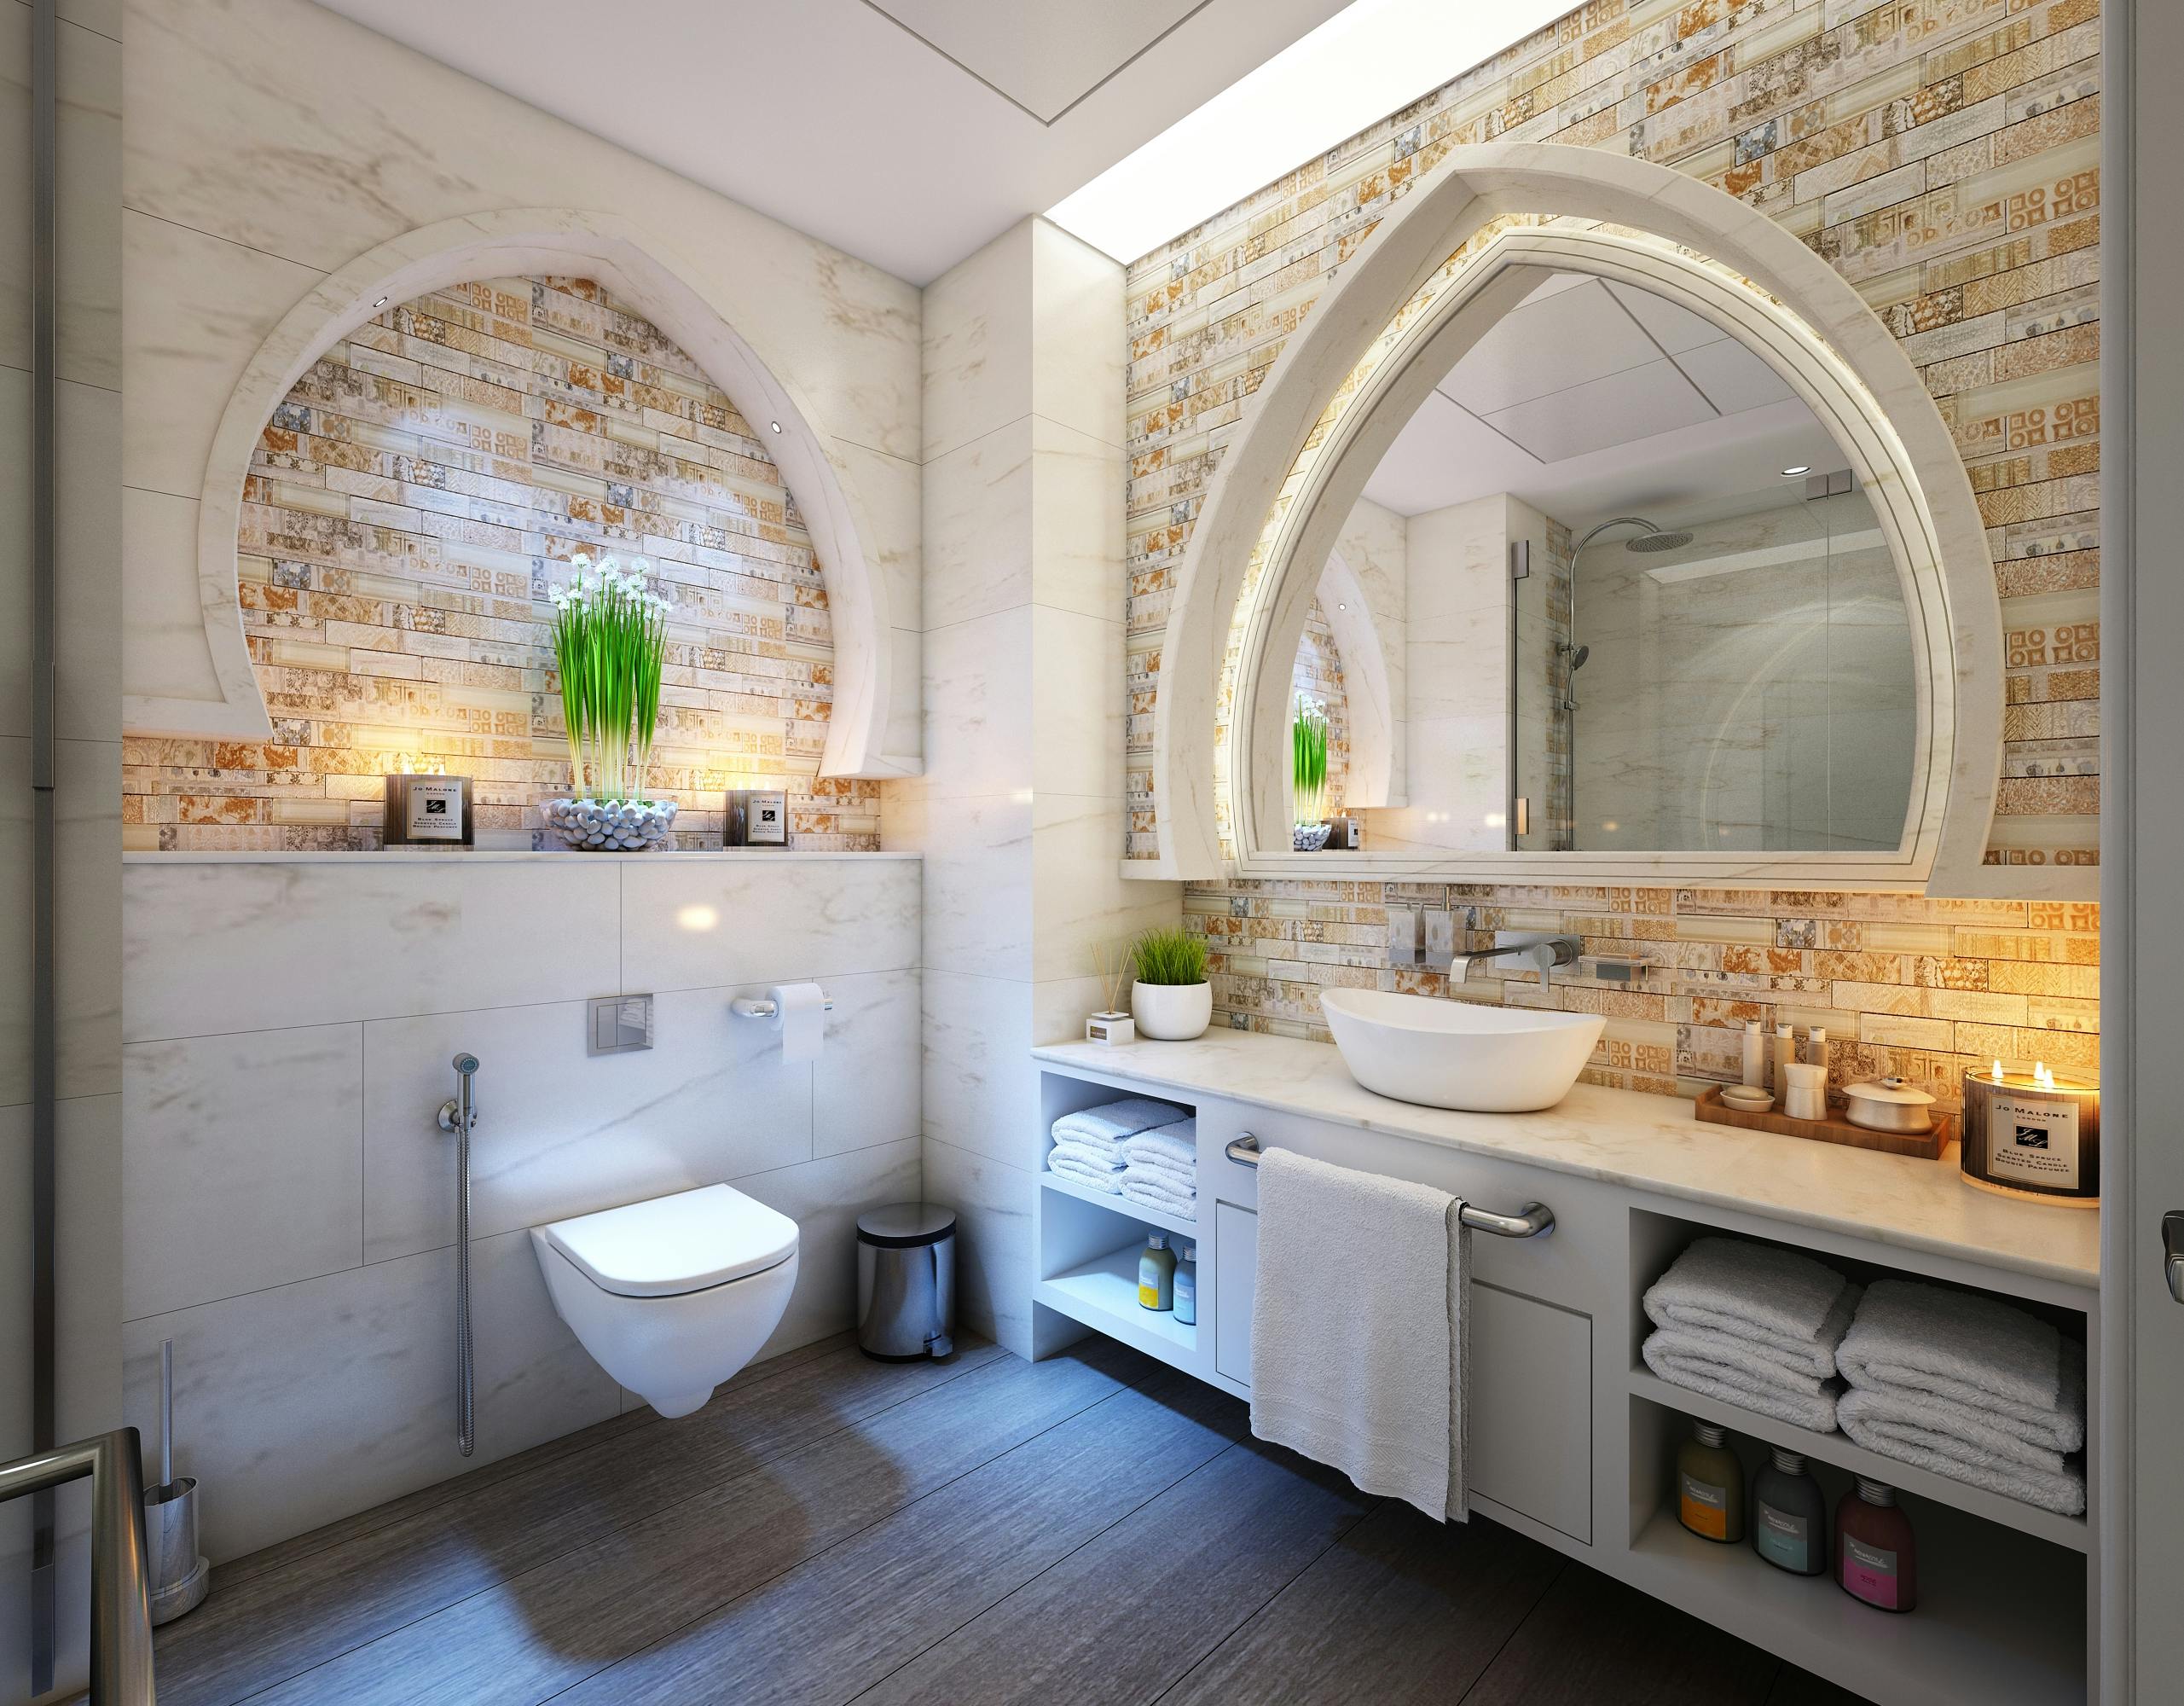 Adding Value to Your Home with a New Bathroom